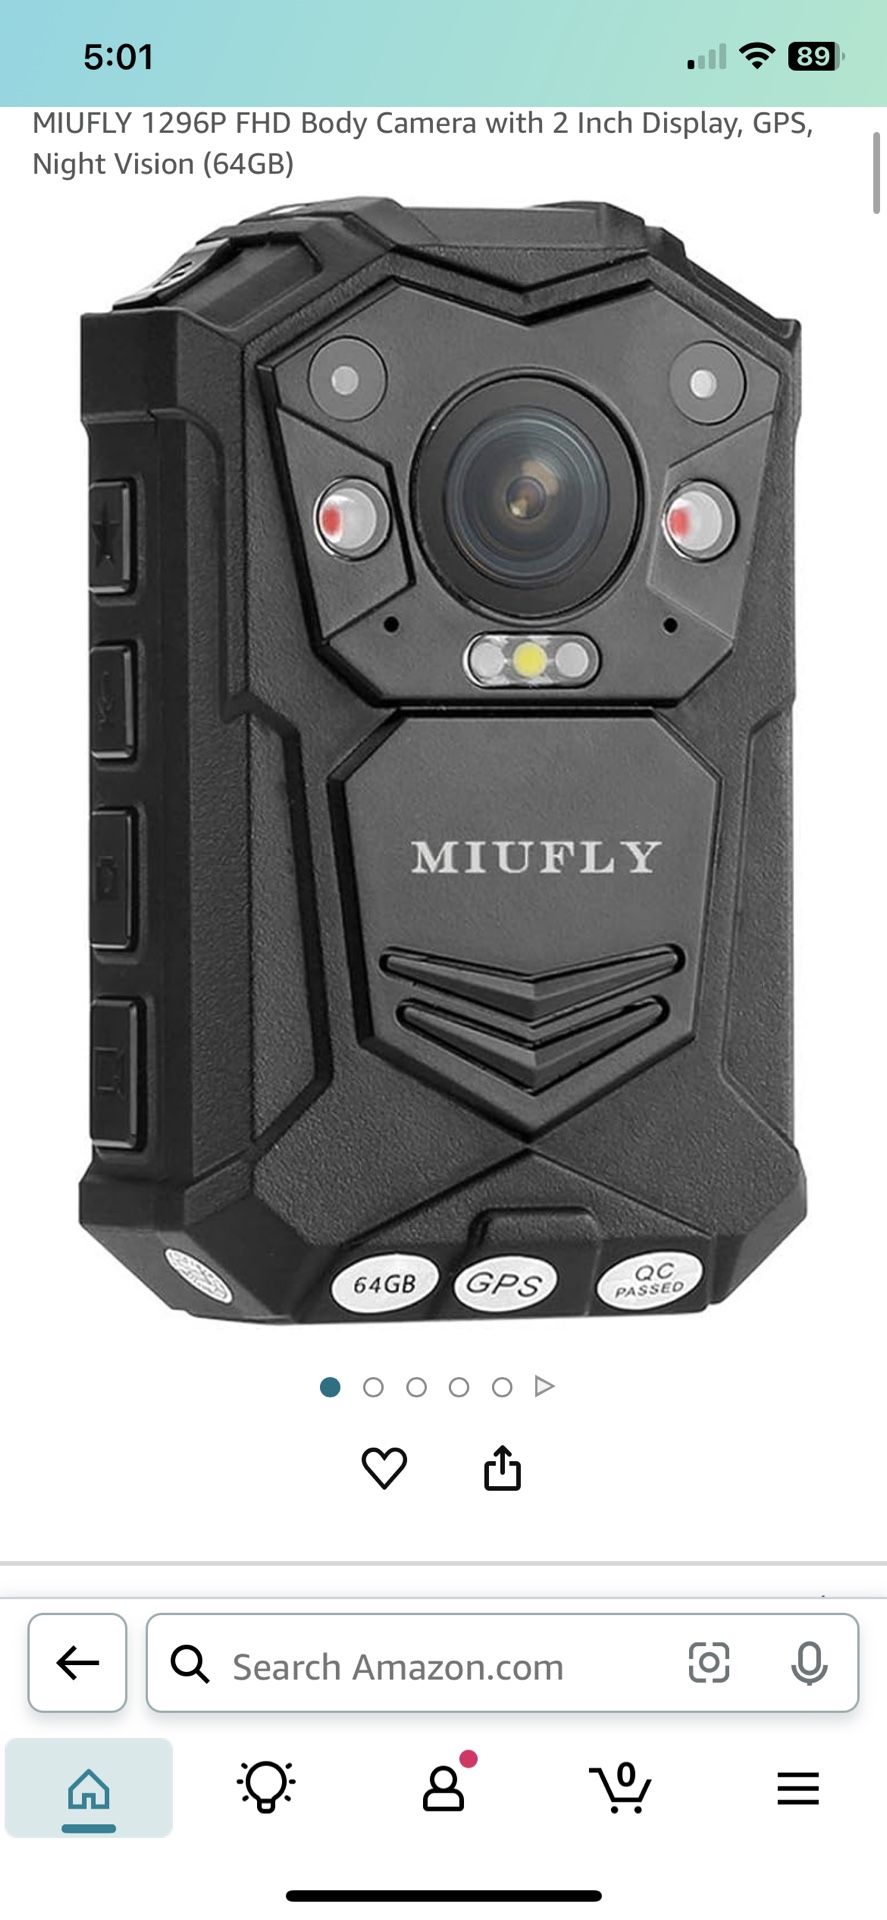 MIUFLY 1296P FHD Body Camera with 2 Inch Display, GPS, Night Vision (32GB)